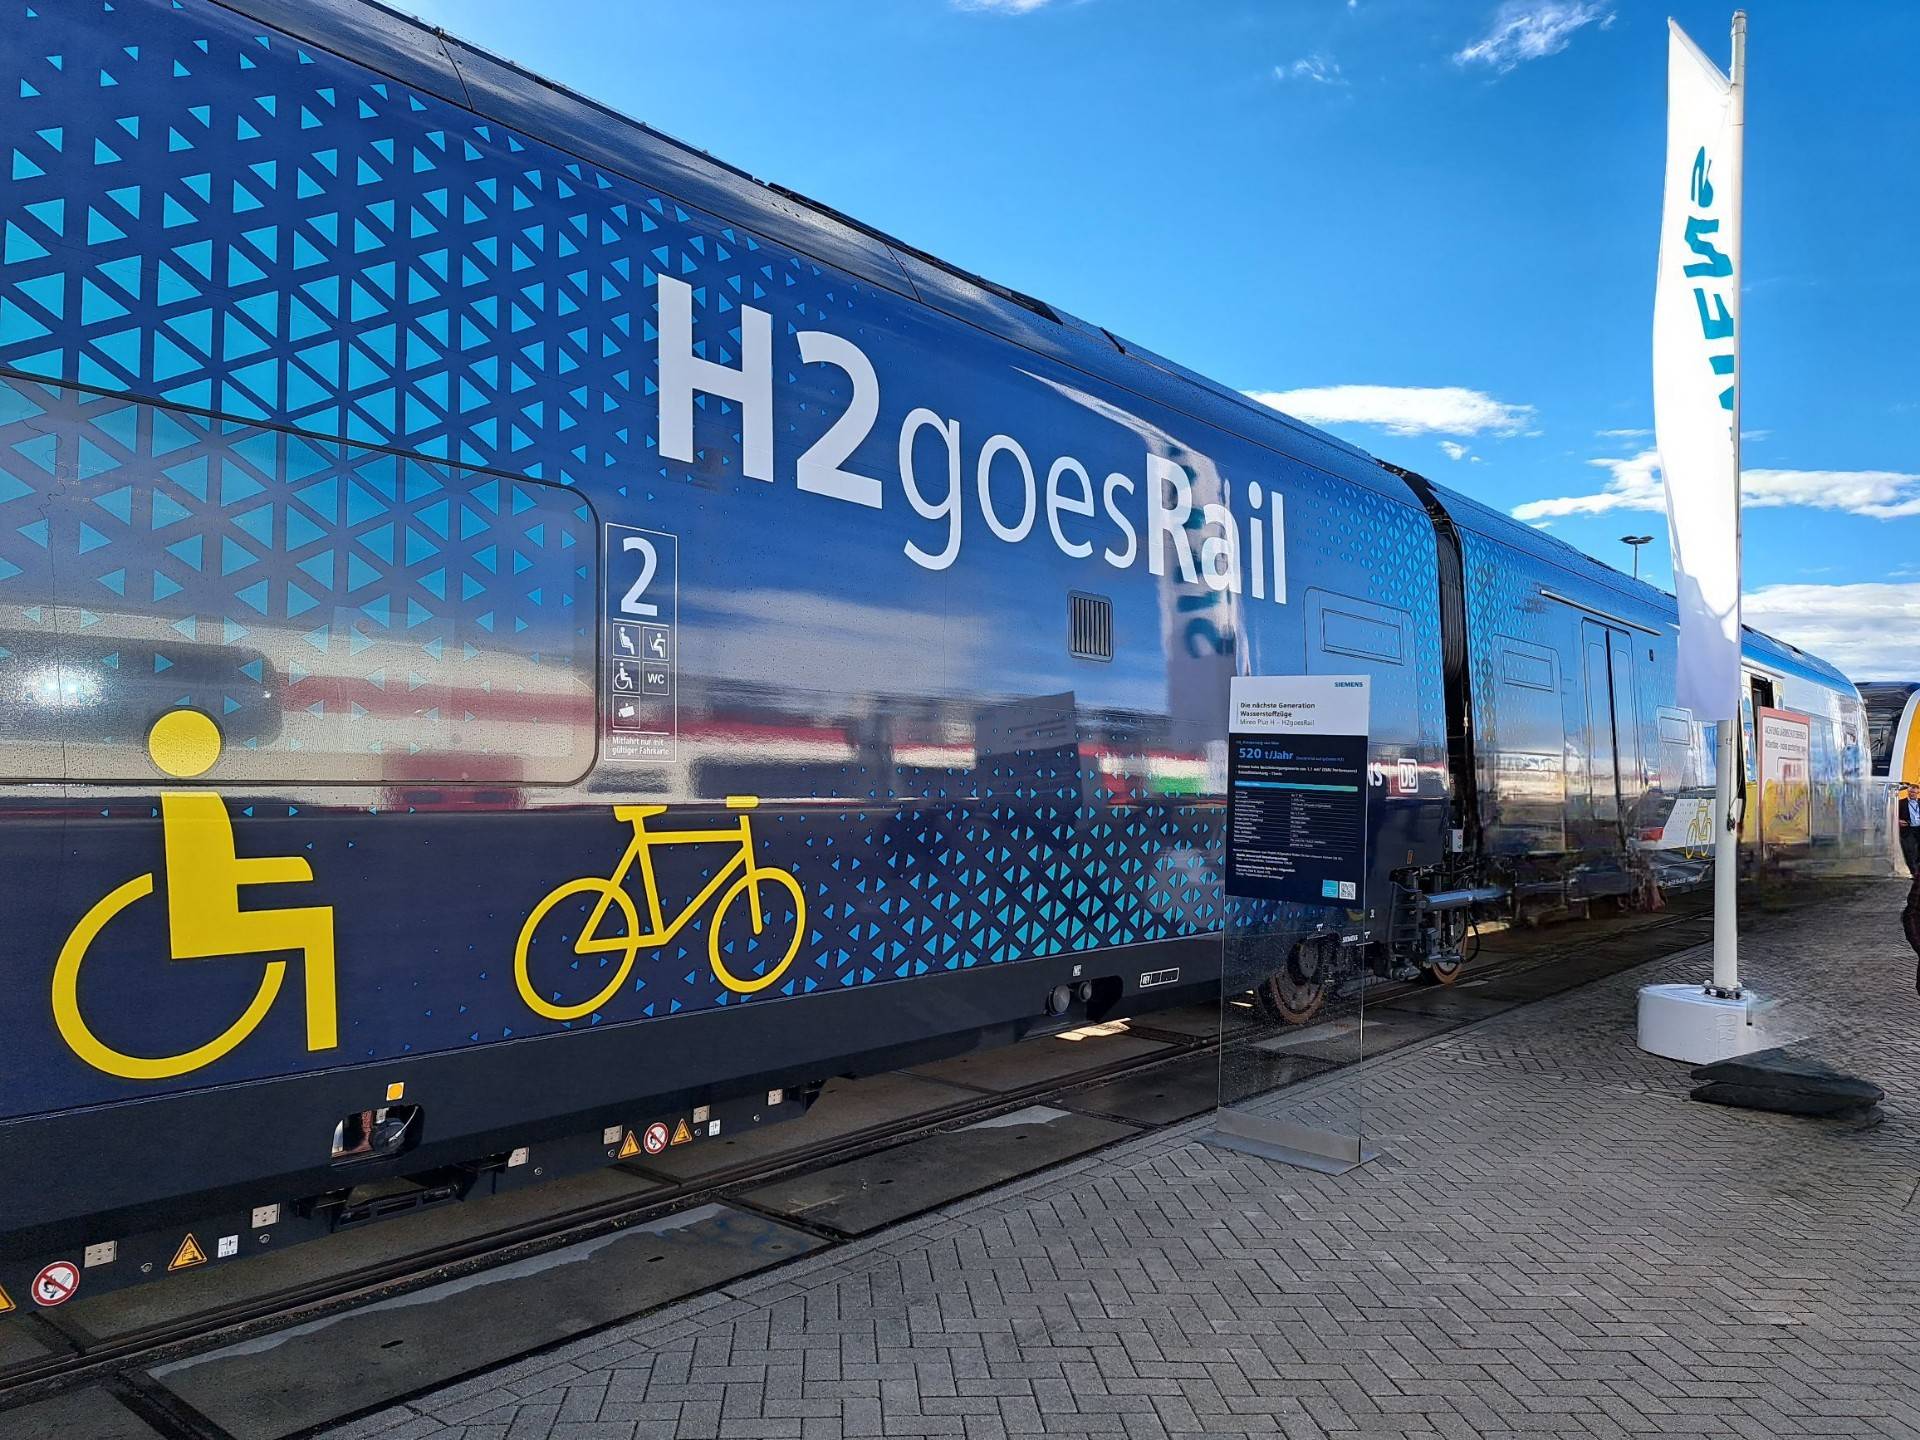 H2goesRail train by Siemens at Innotrans 2022